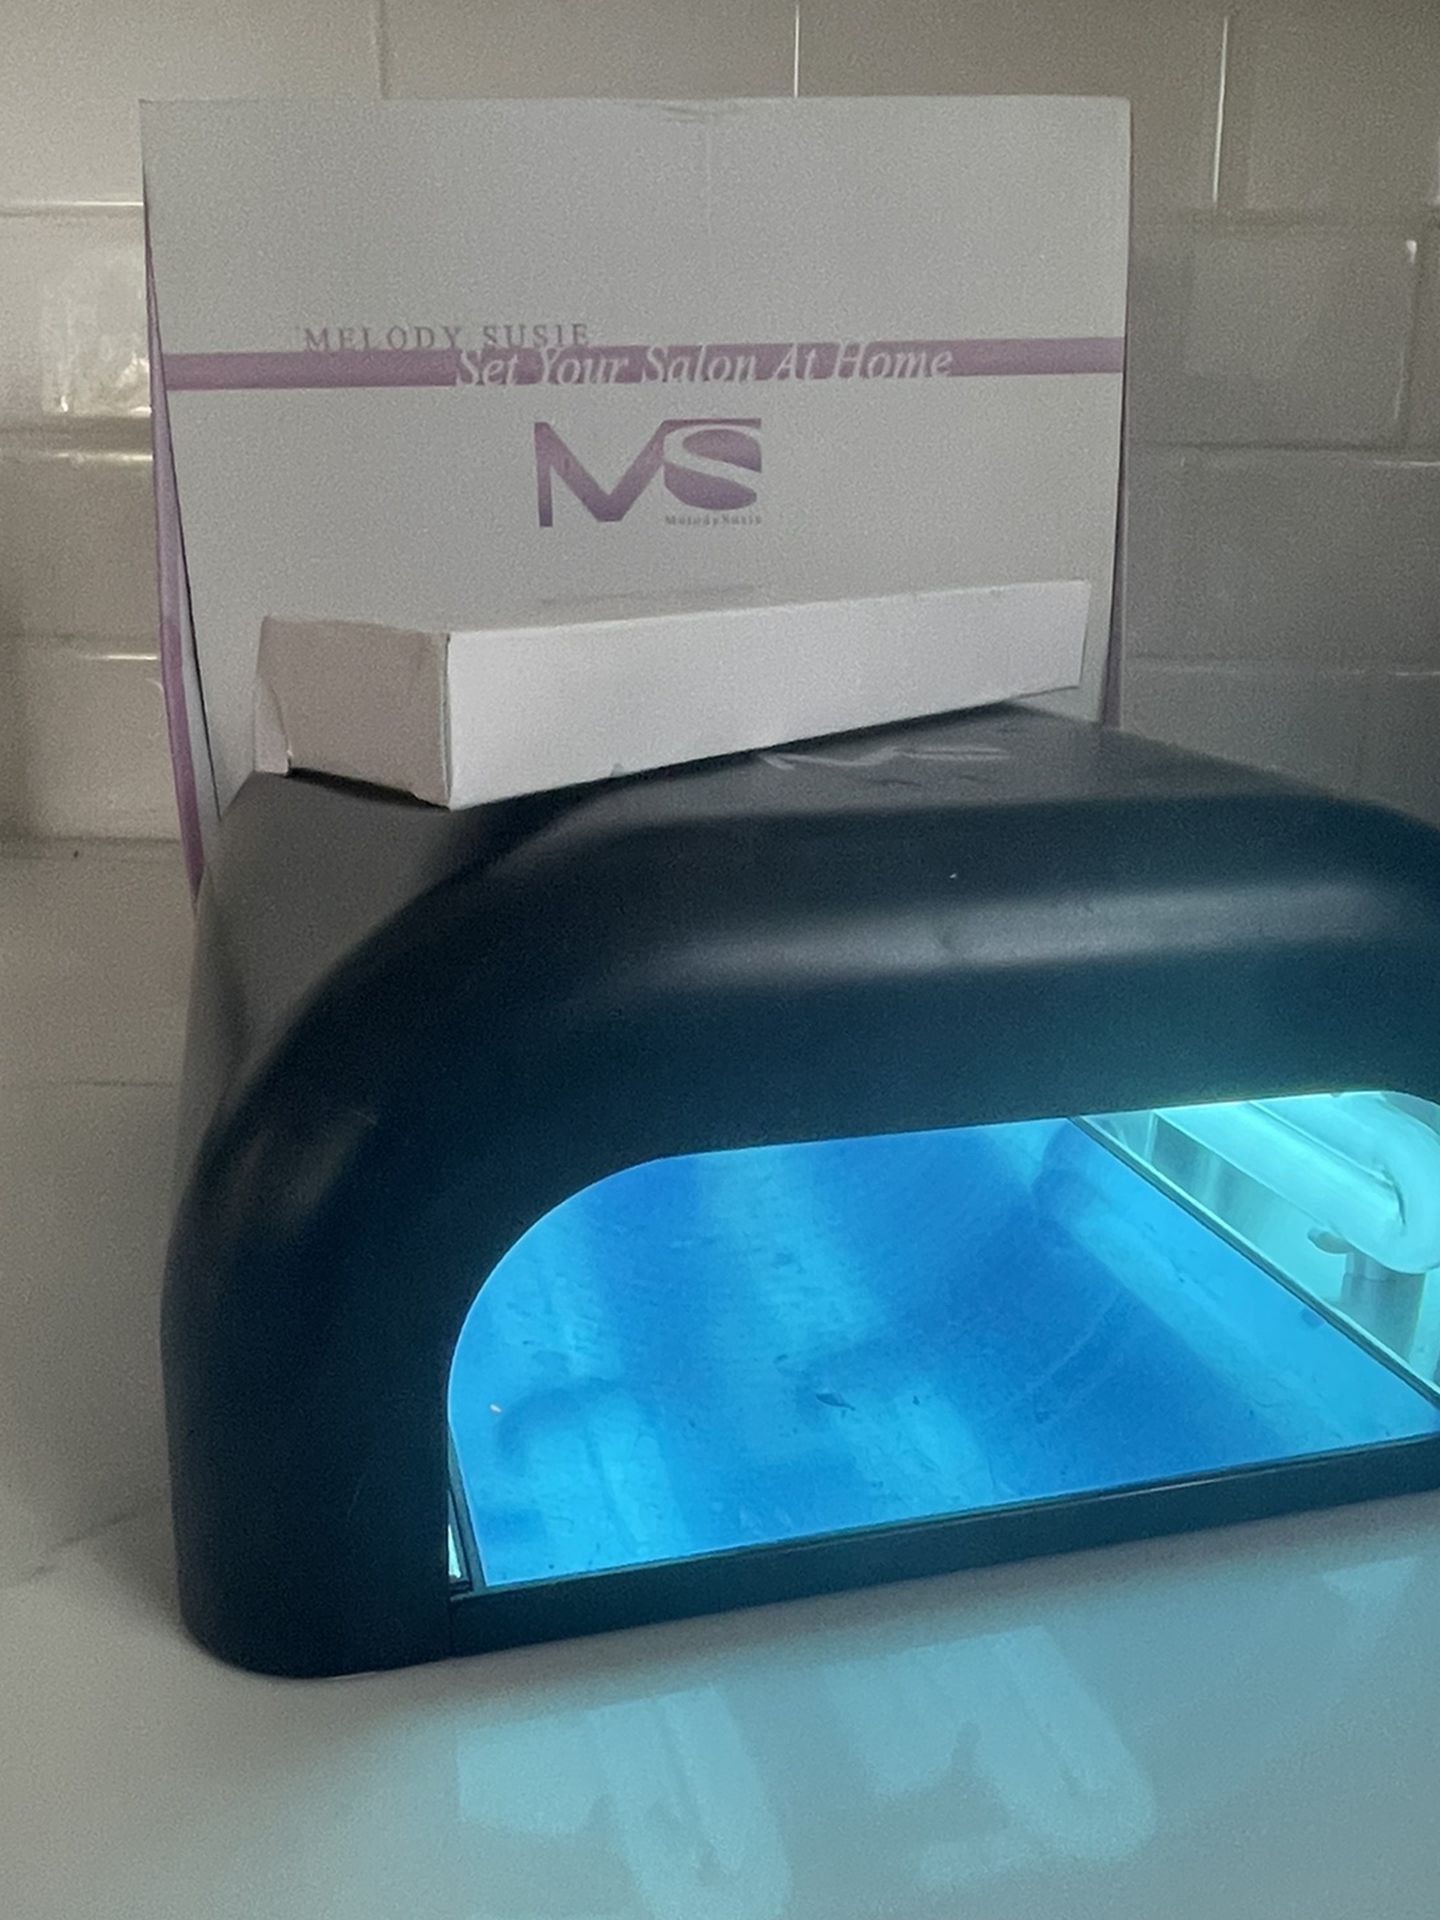 Melody Susie UV Lamp (gel nails Curing Lamp)